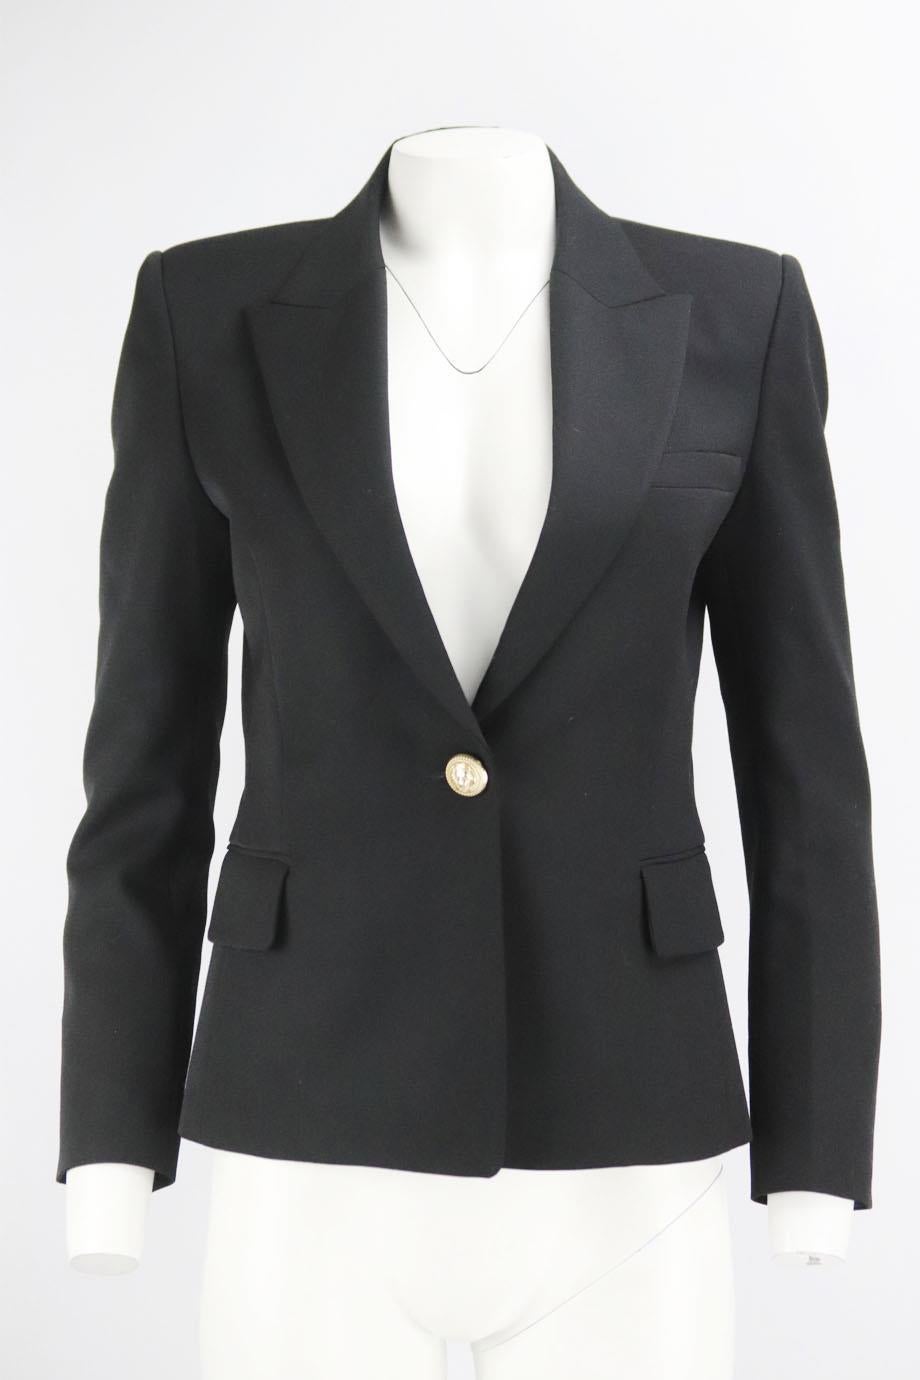 Balmain wool blazer. Black. Long sleeve, v-neck. Button fastening at front. 100% Wool; lining: 52% viscose, 48% cotton. Size: FR 40 (UK 12, US 8, IT 44). Shoulder to shoulder: 15.5 in. Bust: 36 in. Waist: 32 in. Hips: 38 in. Length: 26 in Very good